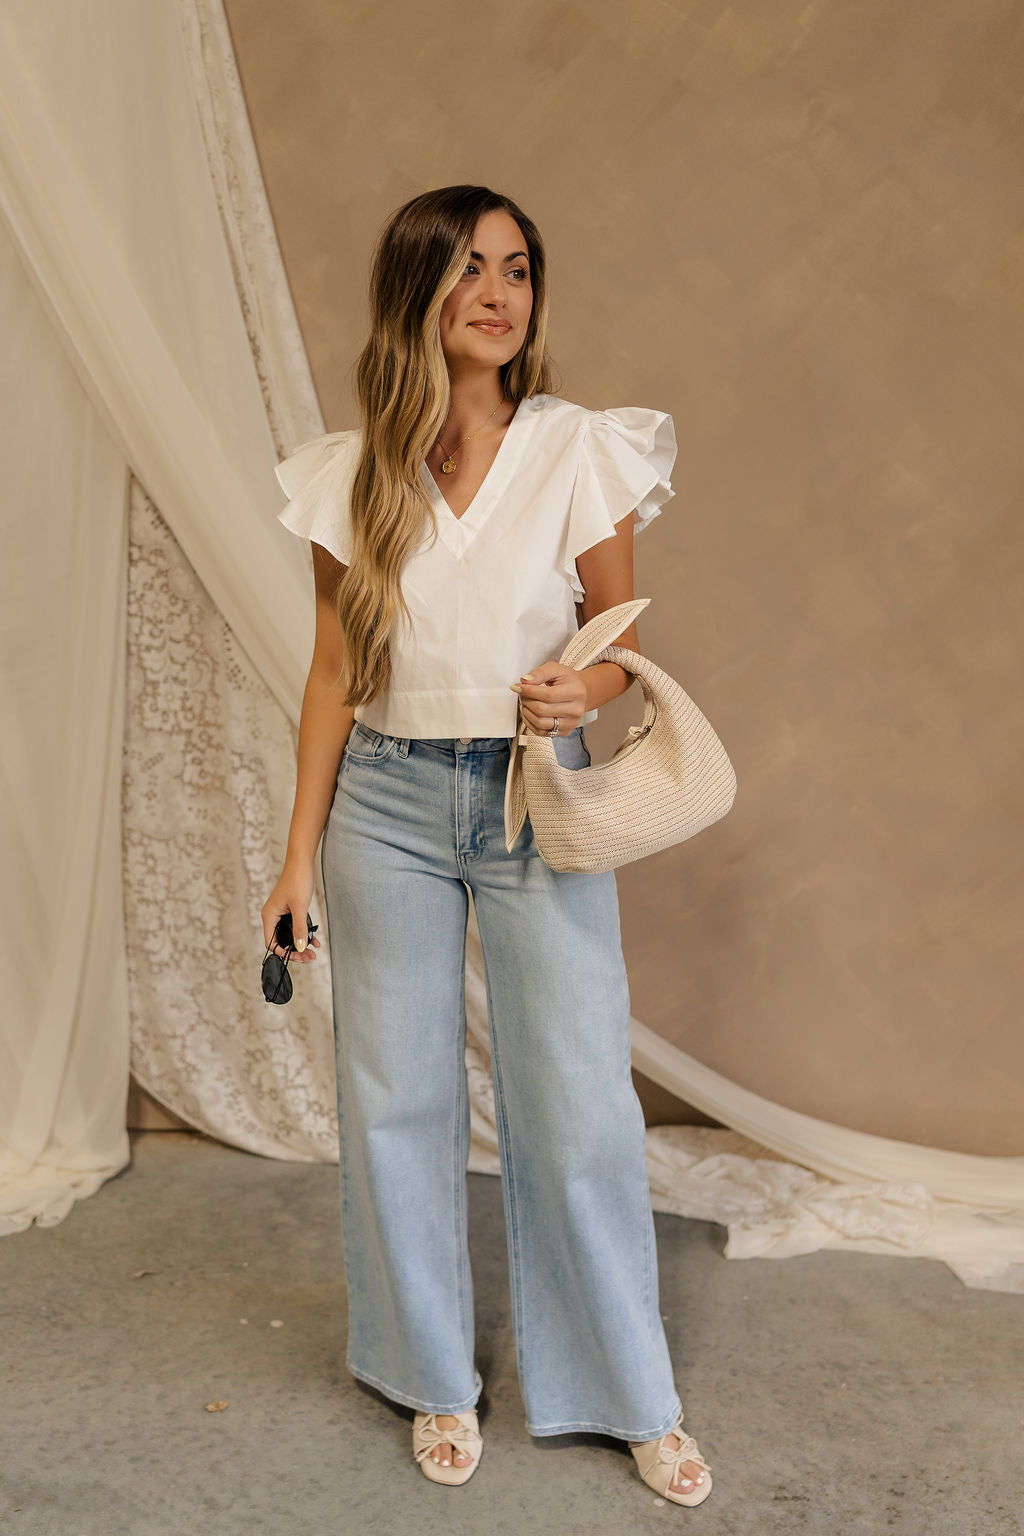 Full body front view of female model wearing the Jemma White Ruffle Top that has white fabric, short ruffled cap sleeves, a v neckline, and keyhole back. Worn with blue jeans.